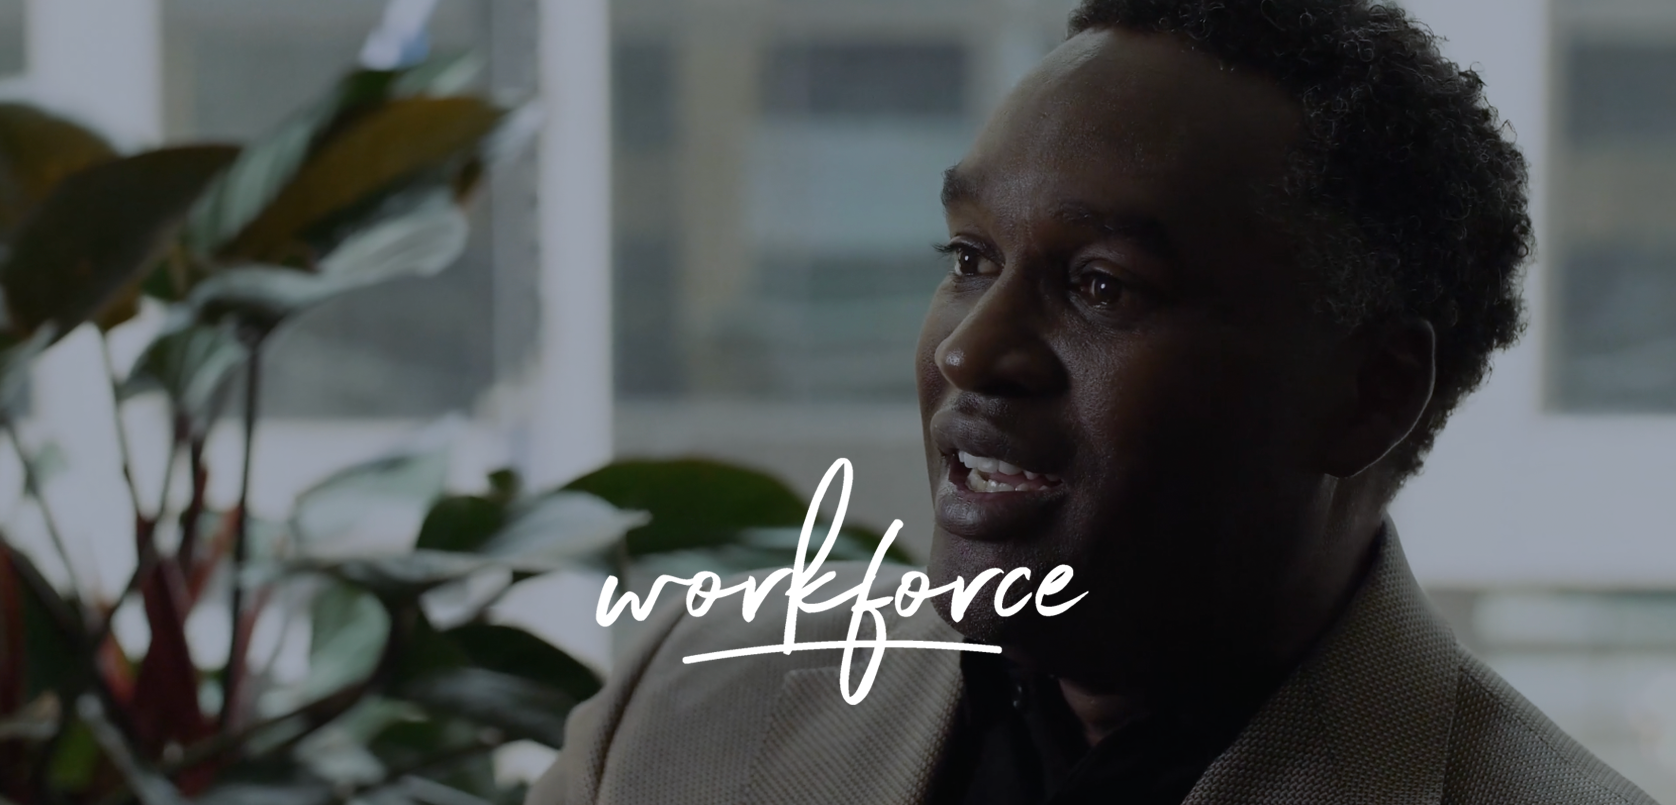 A professional man engaged in a conversation in an office setting with the word "workforce" superimposed on the image, suggesting a theme related to employment, business, or the corporate world.